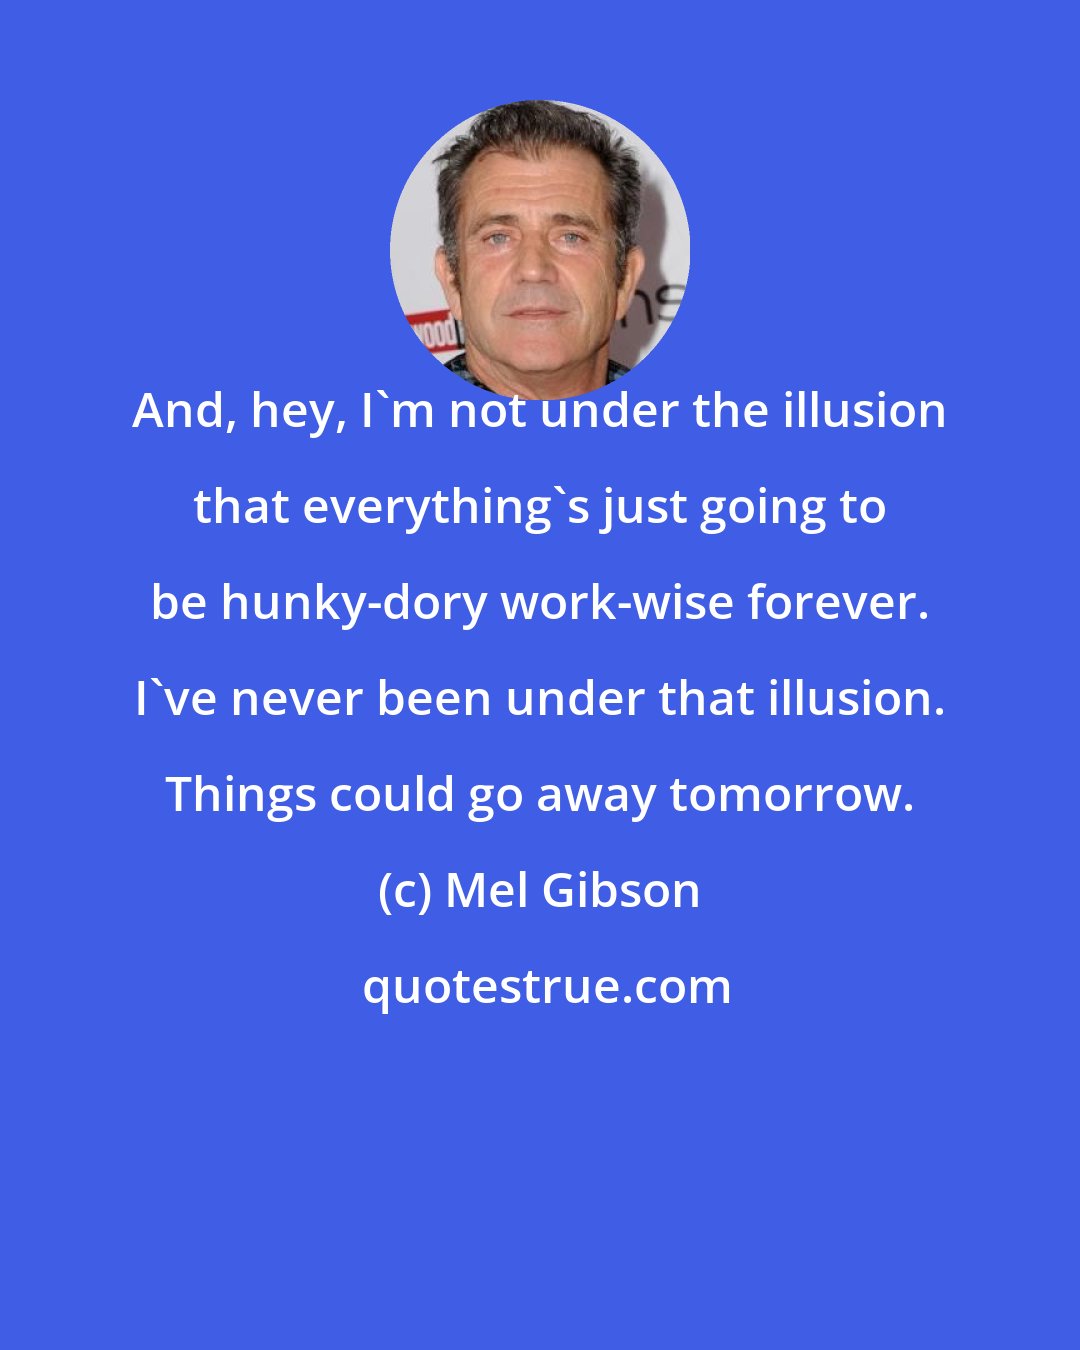 Mel Gibson: And, hey, I'm not under the illusion that everything's just going to be hunky-dory work-wise forever. I've never been under that illusion. Things could go away tomorrow.